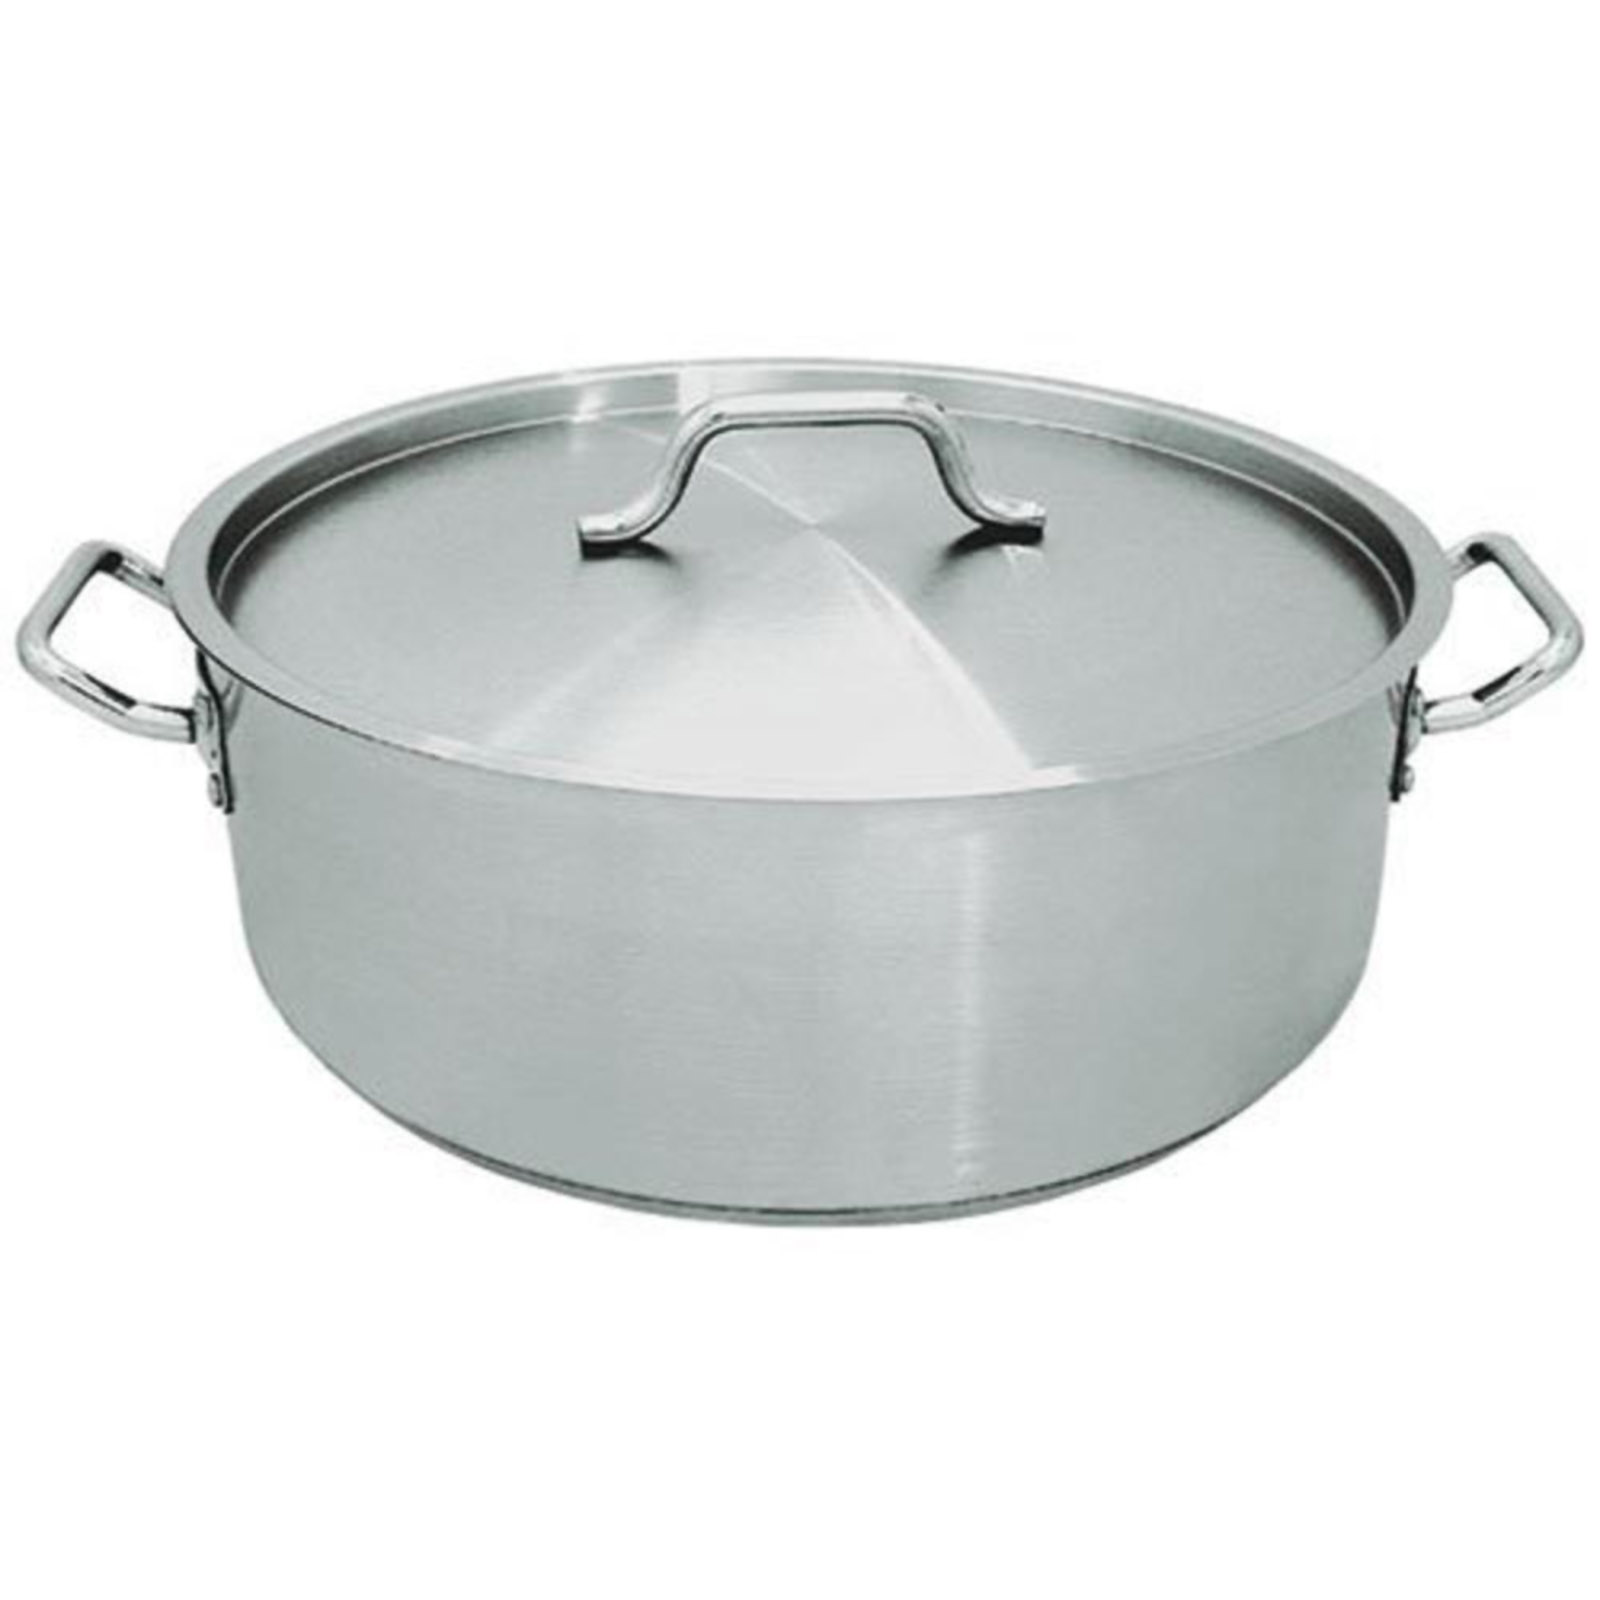 Update International 15qt. Induction Ready Stainless Steel Brazier Pan